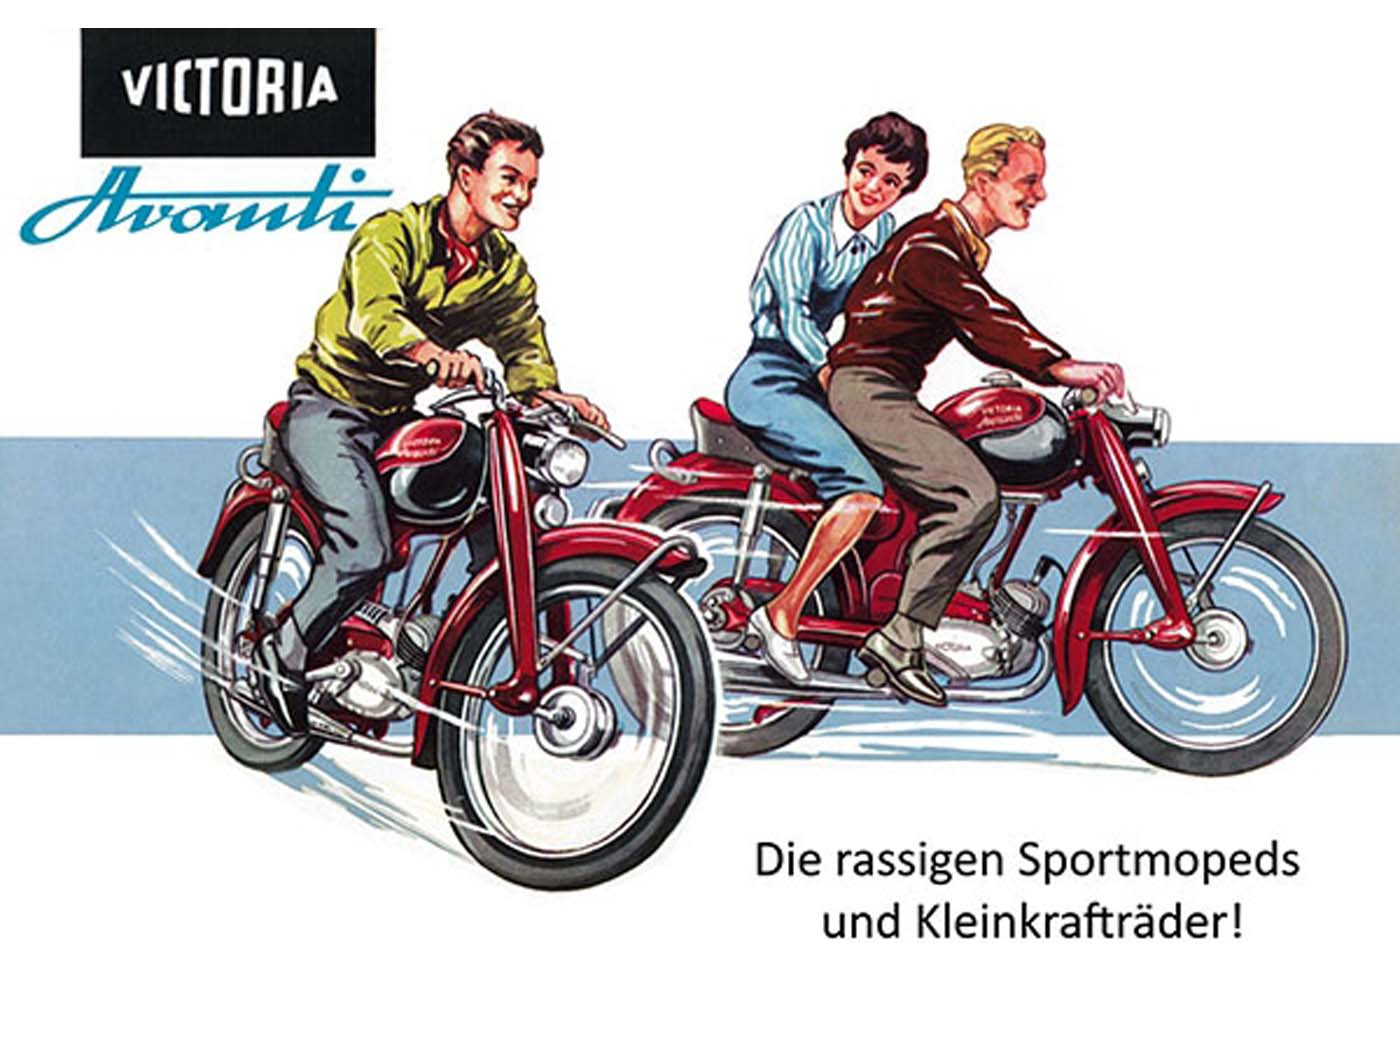 Advertising Poster For Victoria Avanti Sport Moped SM 51 52